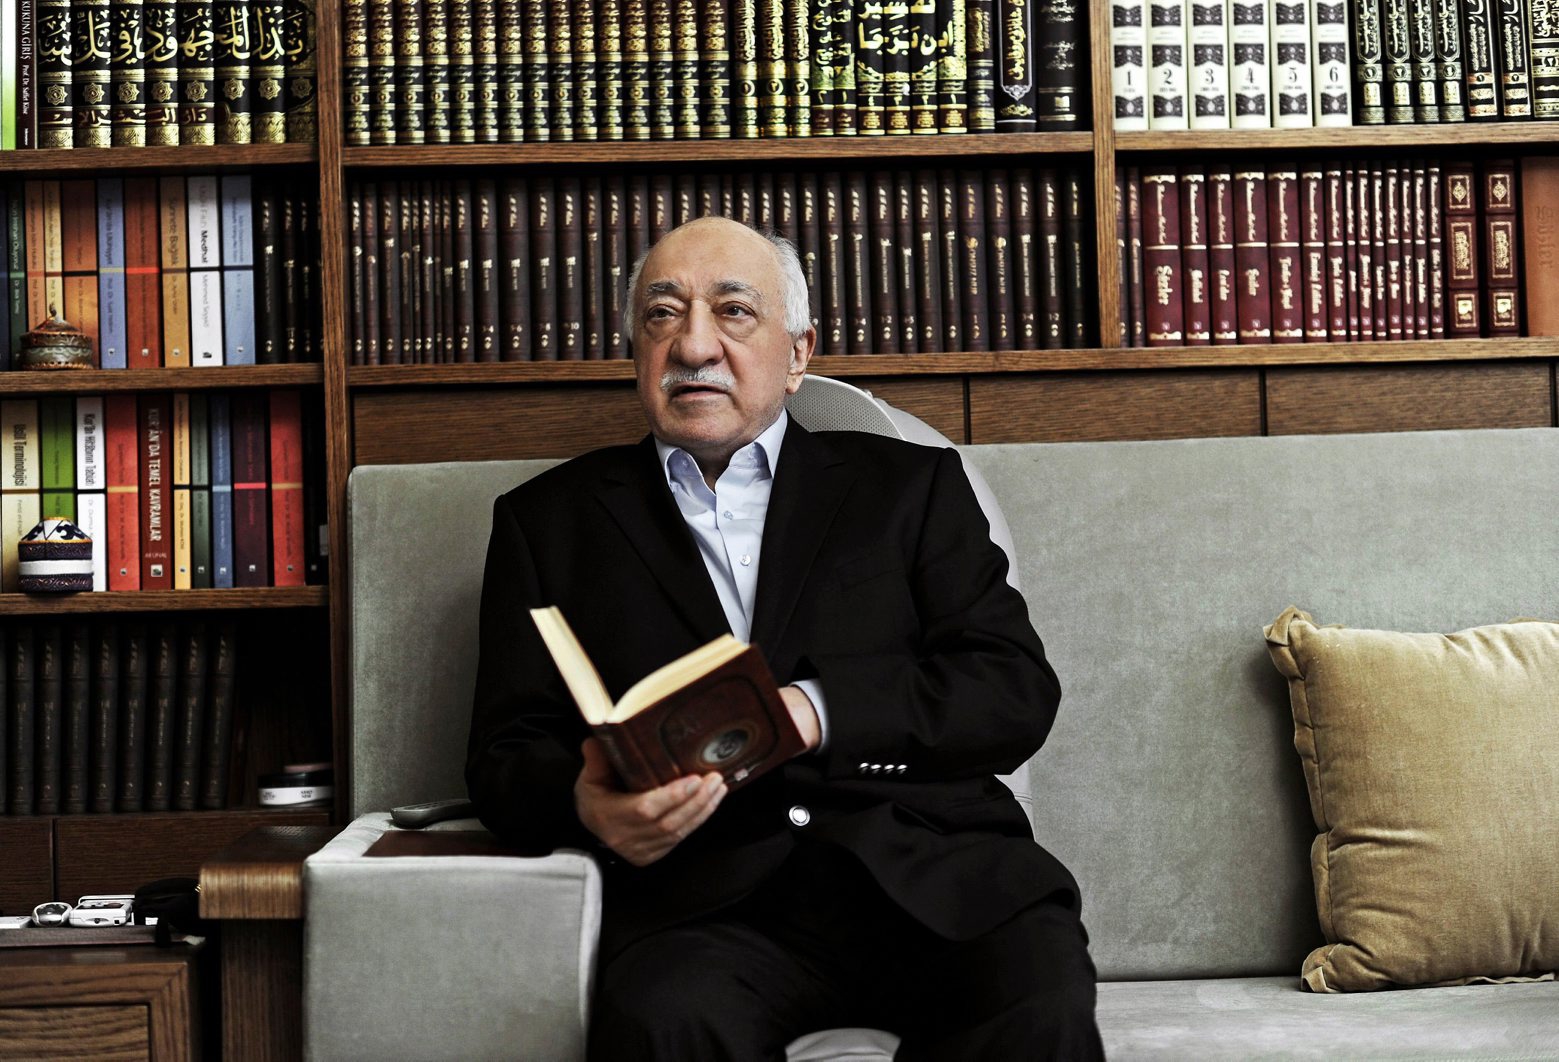 In this March 15, 2014 photo, Turkish Muslim cleric Fethullah Gulen, sits at his residence in Saylorsburg, Pennsylvania, United States. A U.S.-based Muslim cleric, who has become Turkish President Recep Tayyip Erdogan's chief foe, went on trial in absentia in Istanbul on Wednesday, Jan. 6, 2016 accused of attempting to overthrow the government by instigating corruption probes in 2013 that targeted people close to the Turkish leader.  Gulen and 68 other people, including former police chiefs, have been charged with "attempting to overthrow the Turkish republic through the use of violence,î leading a terrorist organization and "political espionage." Prosecutors are seeking life imprisonment for Gulen and others. (AP Photo/Selahattin Sevi) USA ISLAM FETHULLAH GUELEN